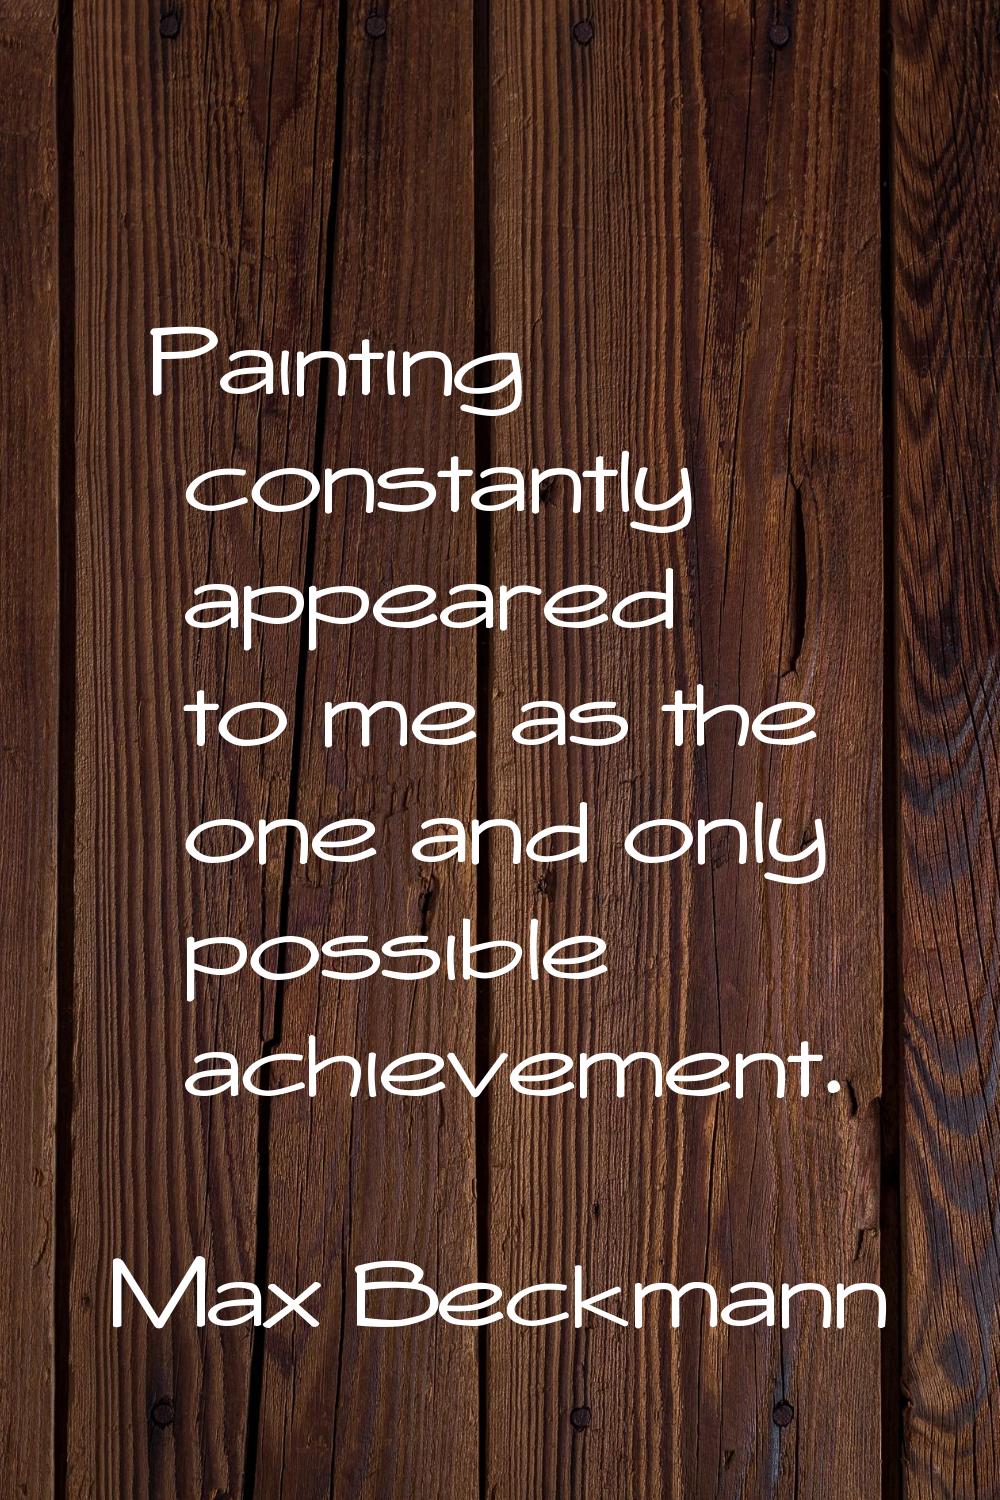 Painting constantly appeared to me as the one and only possible achievement.